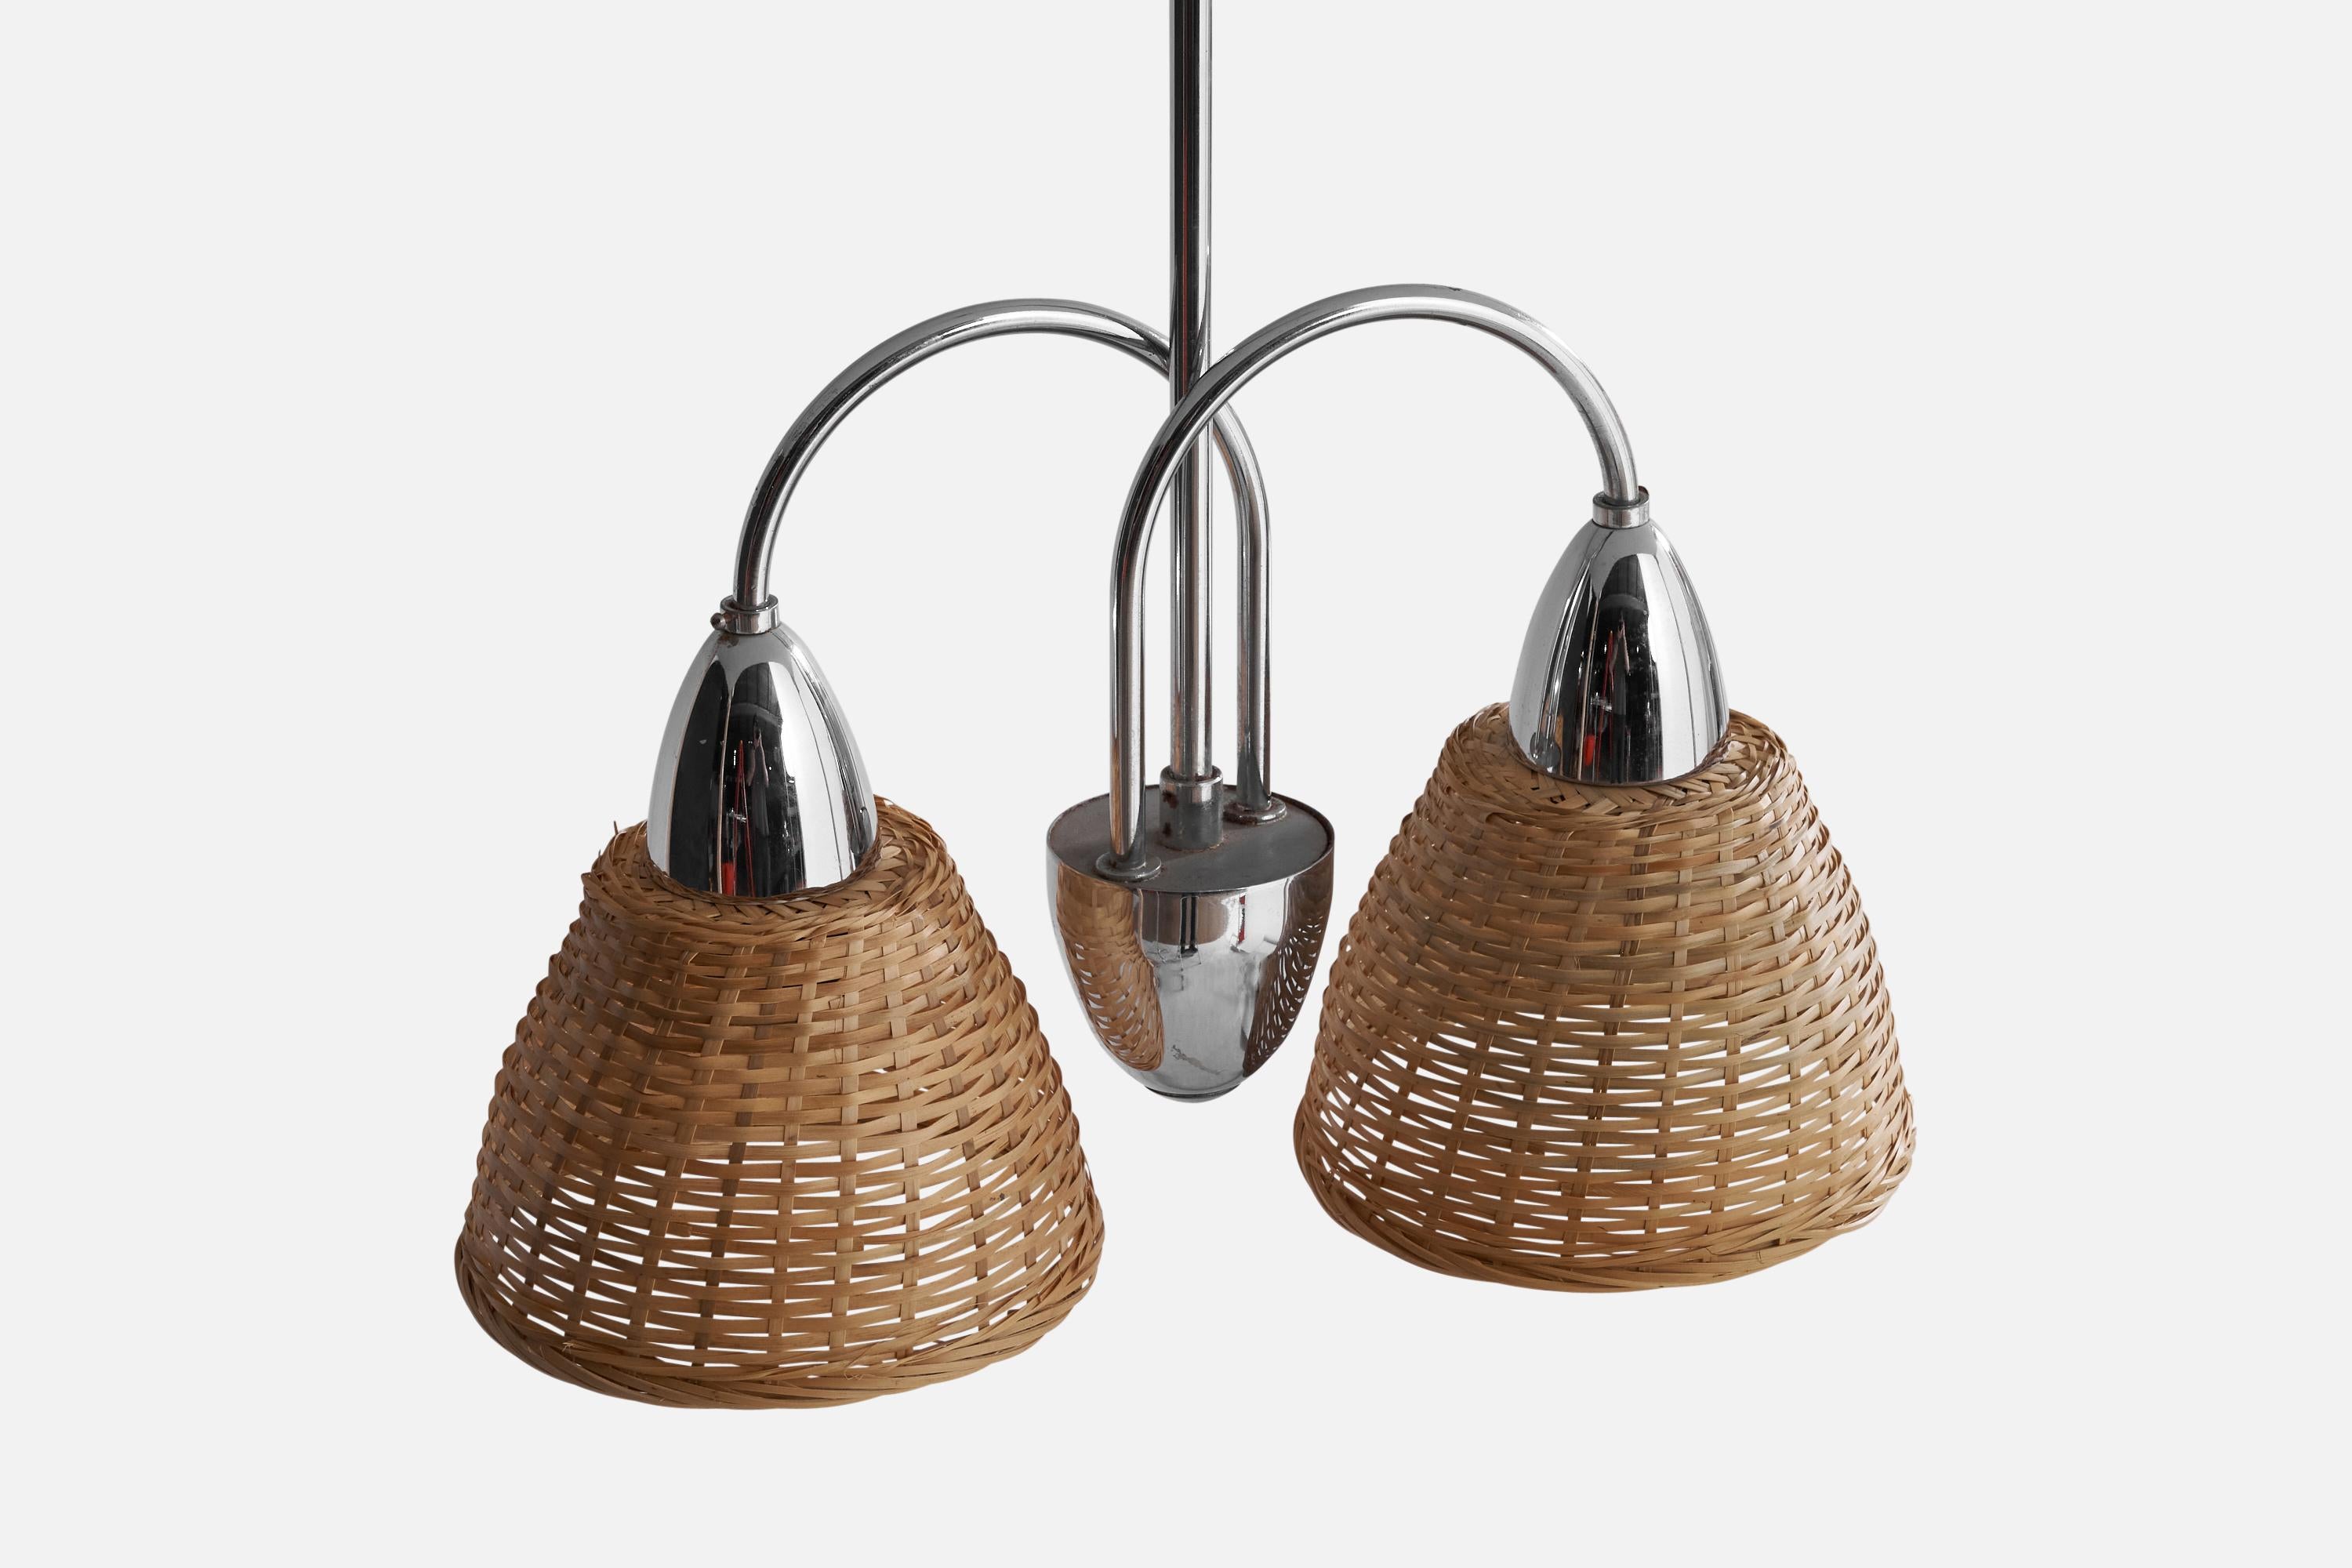 A two-armed chrome and rattan chandelier designed and produced in Finland, 1940s.

Dimensions of canopy (inches): 3.4” H x 2.52” Diameter
Socket takes standard E-26 bulbs. 2 sockets.There is no maximum wattage stated on the fixture. All lighting